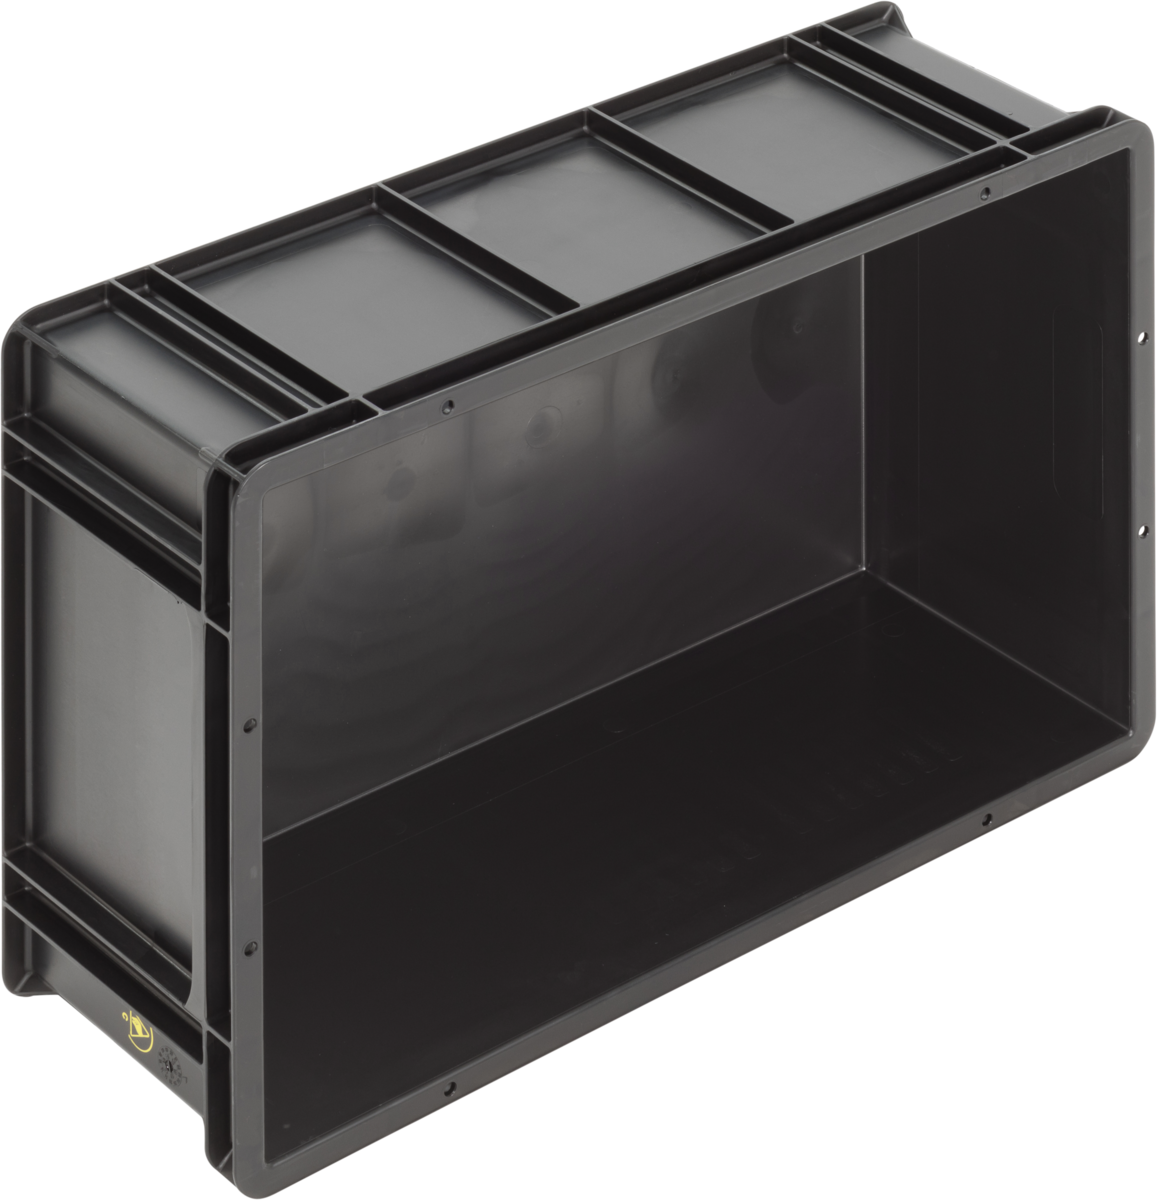 ESD-Safe-SGL-Norm-Stacking-Bin-Containers-Flat-Base-Ref.-6420.007.992_1004497_600x400x212_03